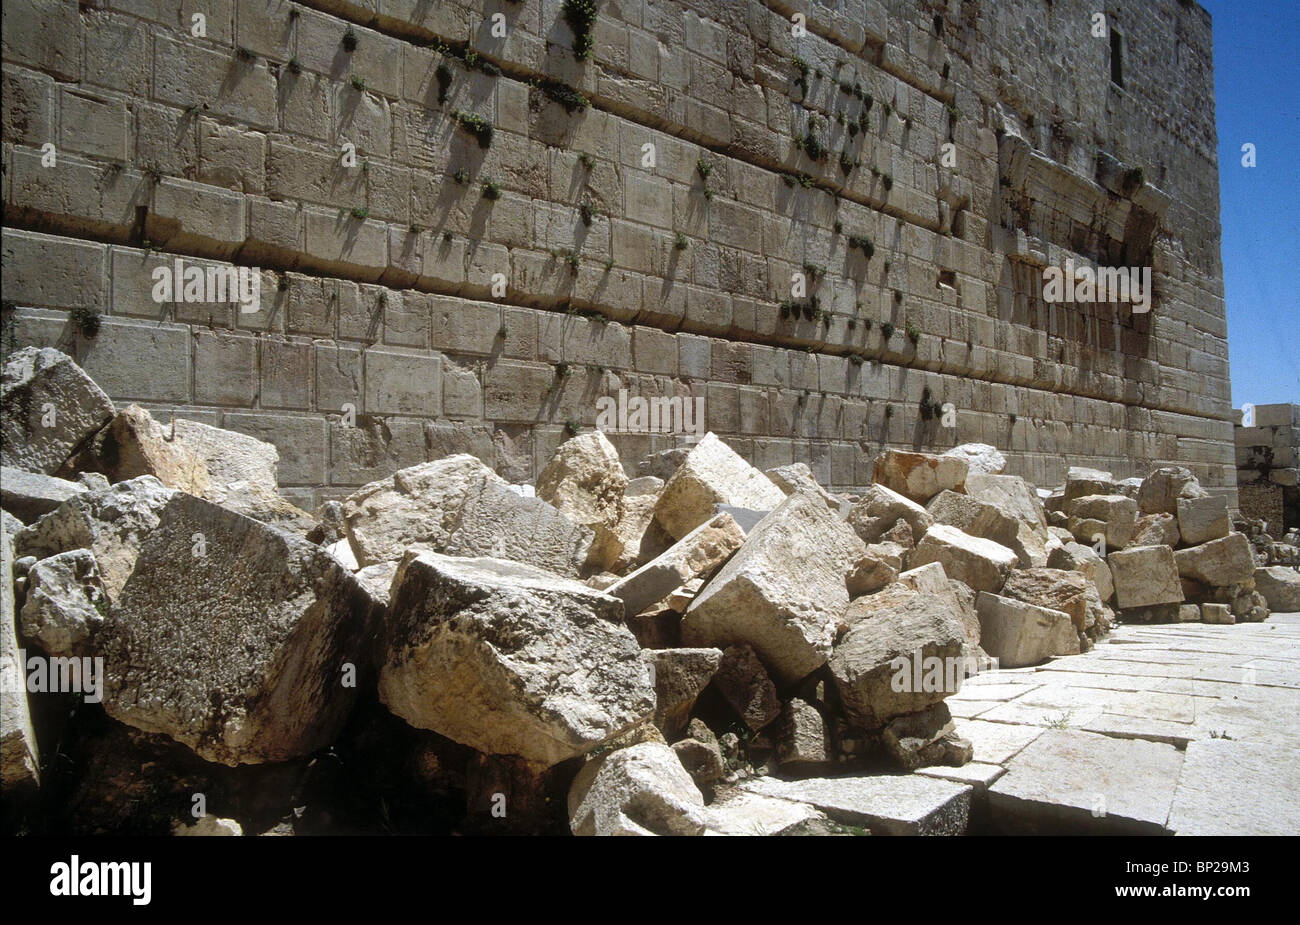 JERUSALEM - THE TEMPLE MOUNT. HUGE STONES LIE IN HEAPS ON THE ROMAN STREET NEAR ROBINSON'S ARCH. THESE CHISELLED ASHLARS FORMED Stock Photo